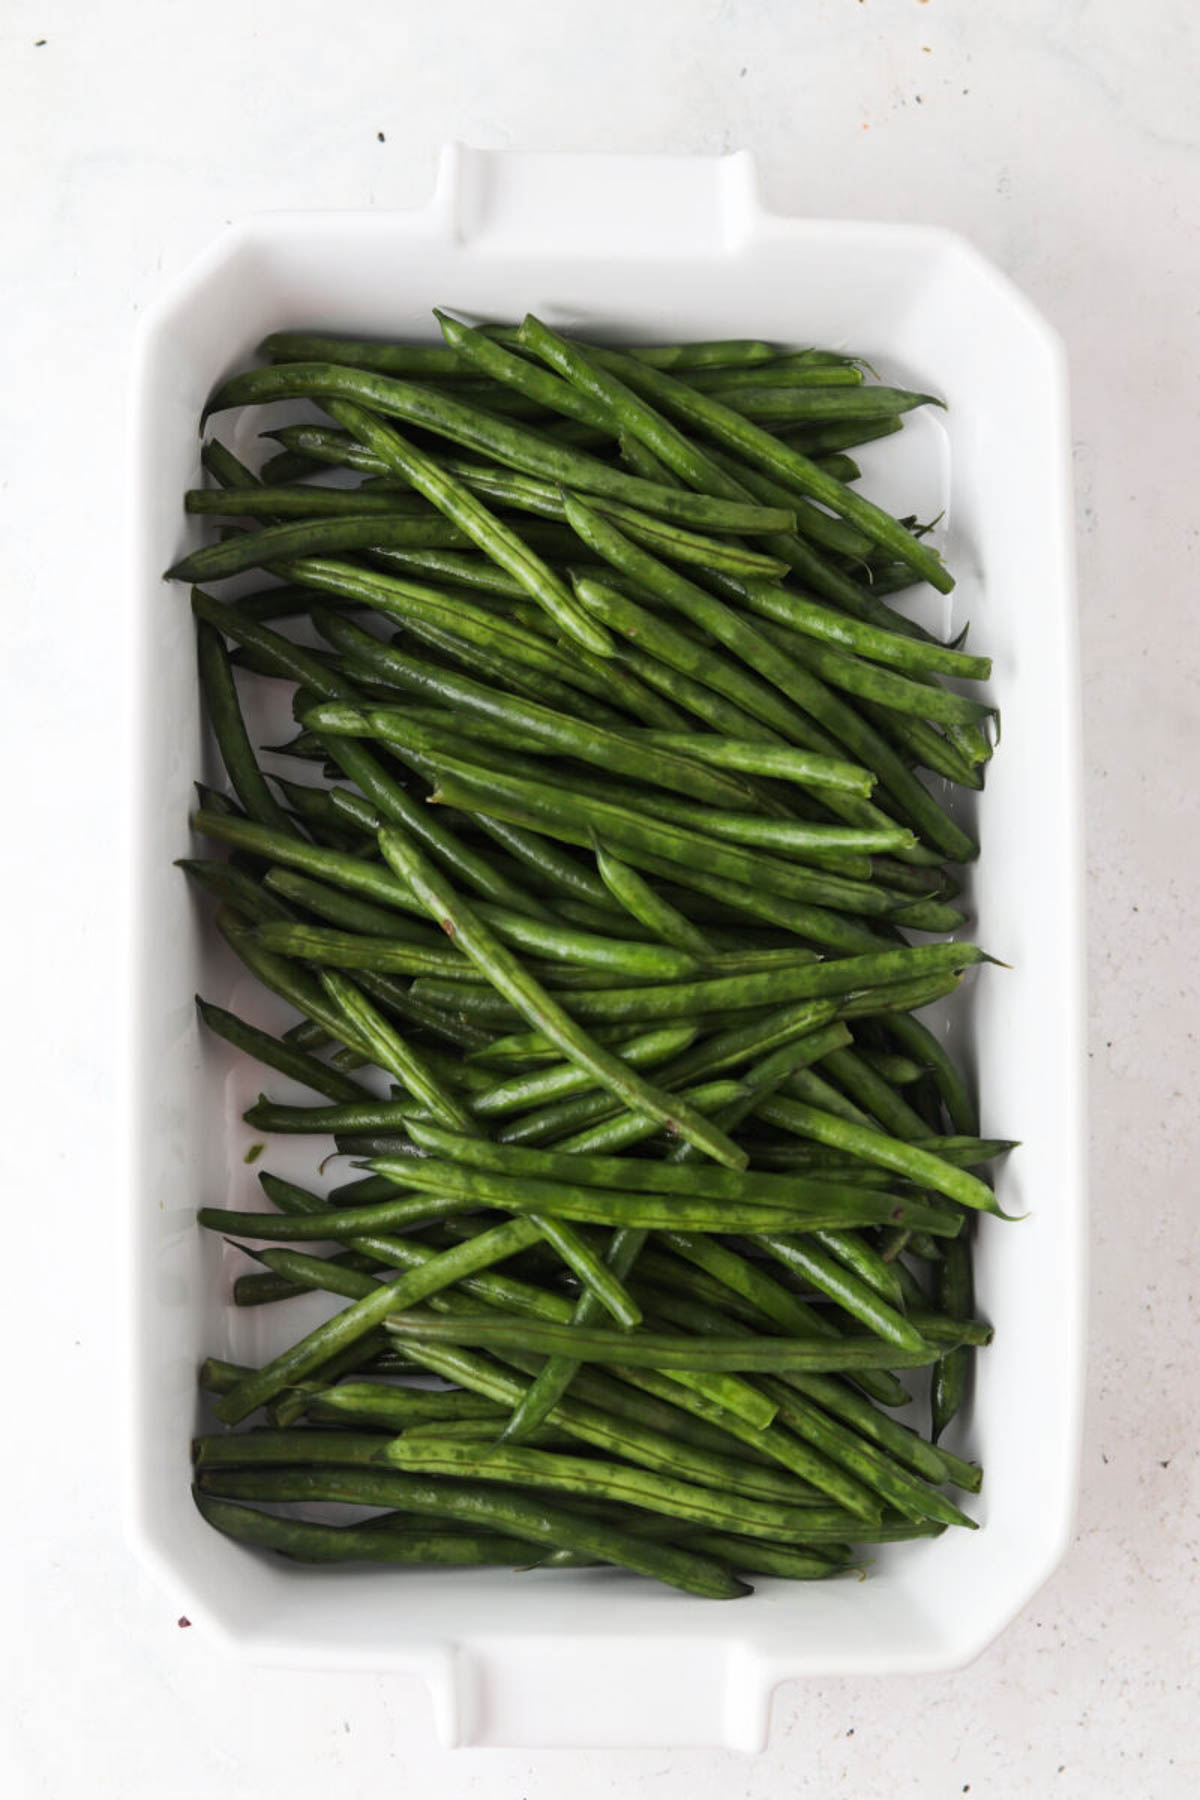 Green beans in a white casserole dish uncovered.